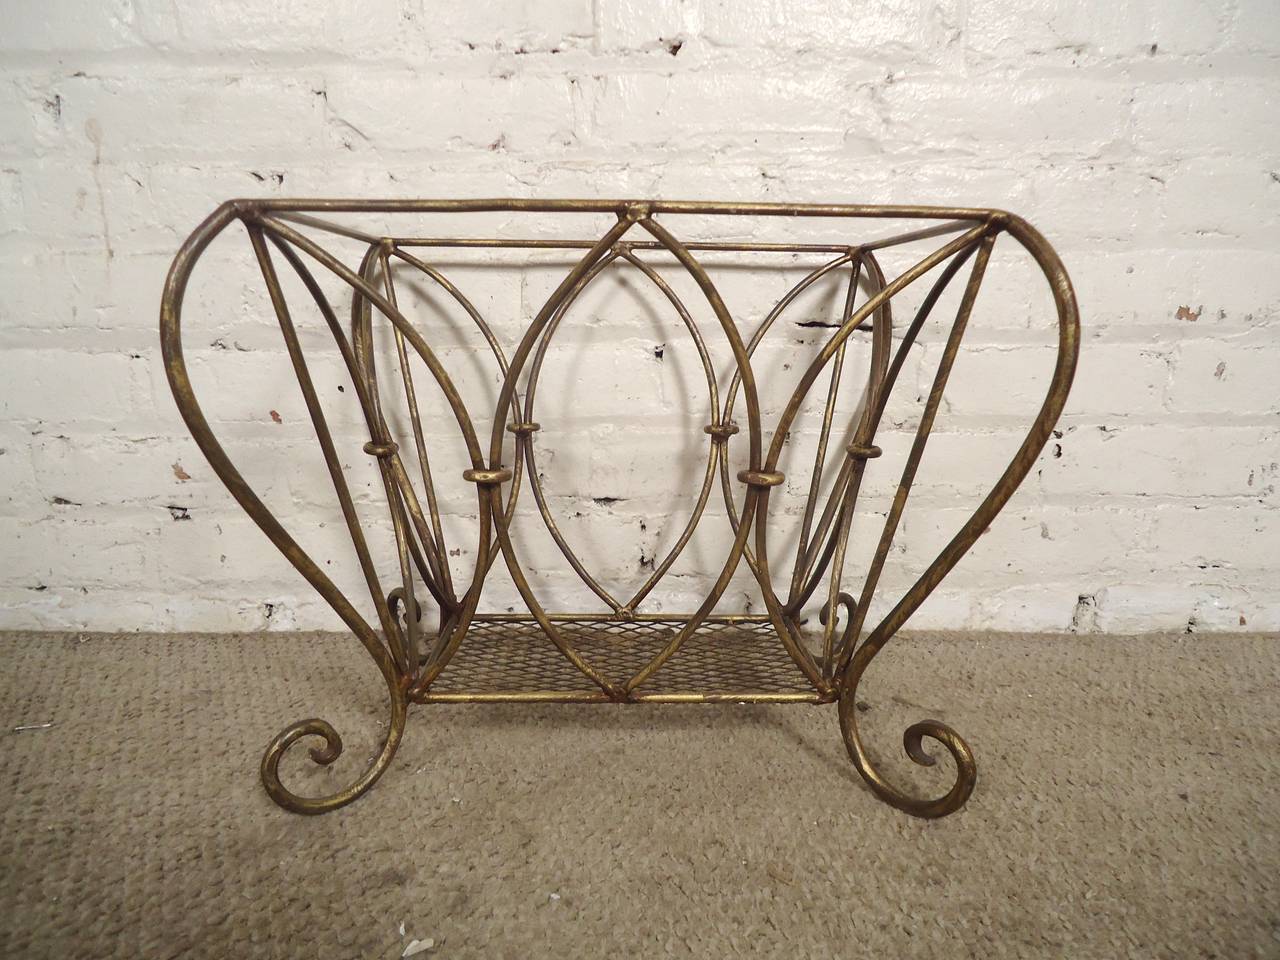 Vintage waste basket with a gold painted finish. Mesh bottom with lovely scrolling detail. Makes a great magazine rack.

(Please confirm item location - NY or NJ - with dealer)